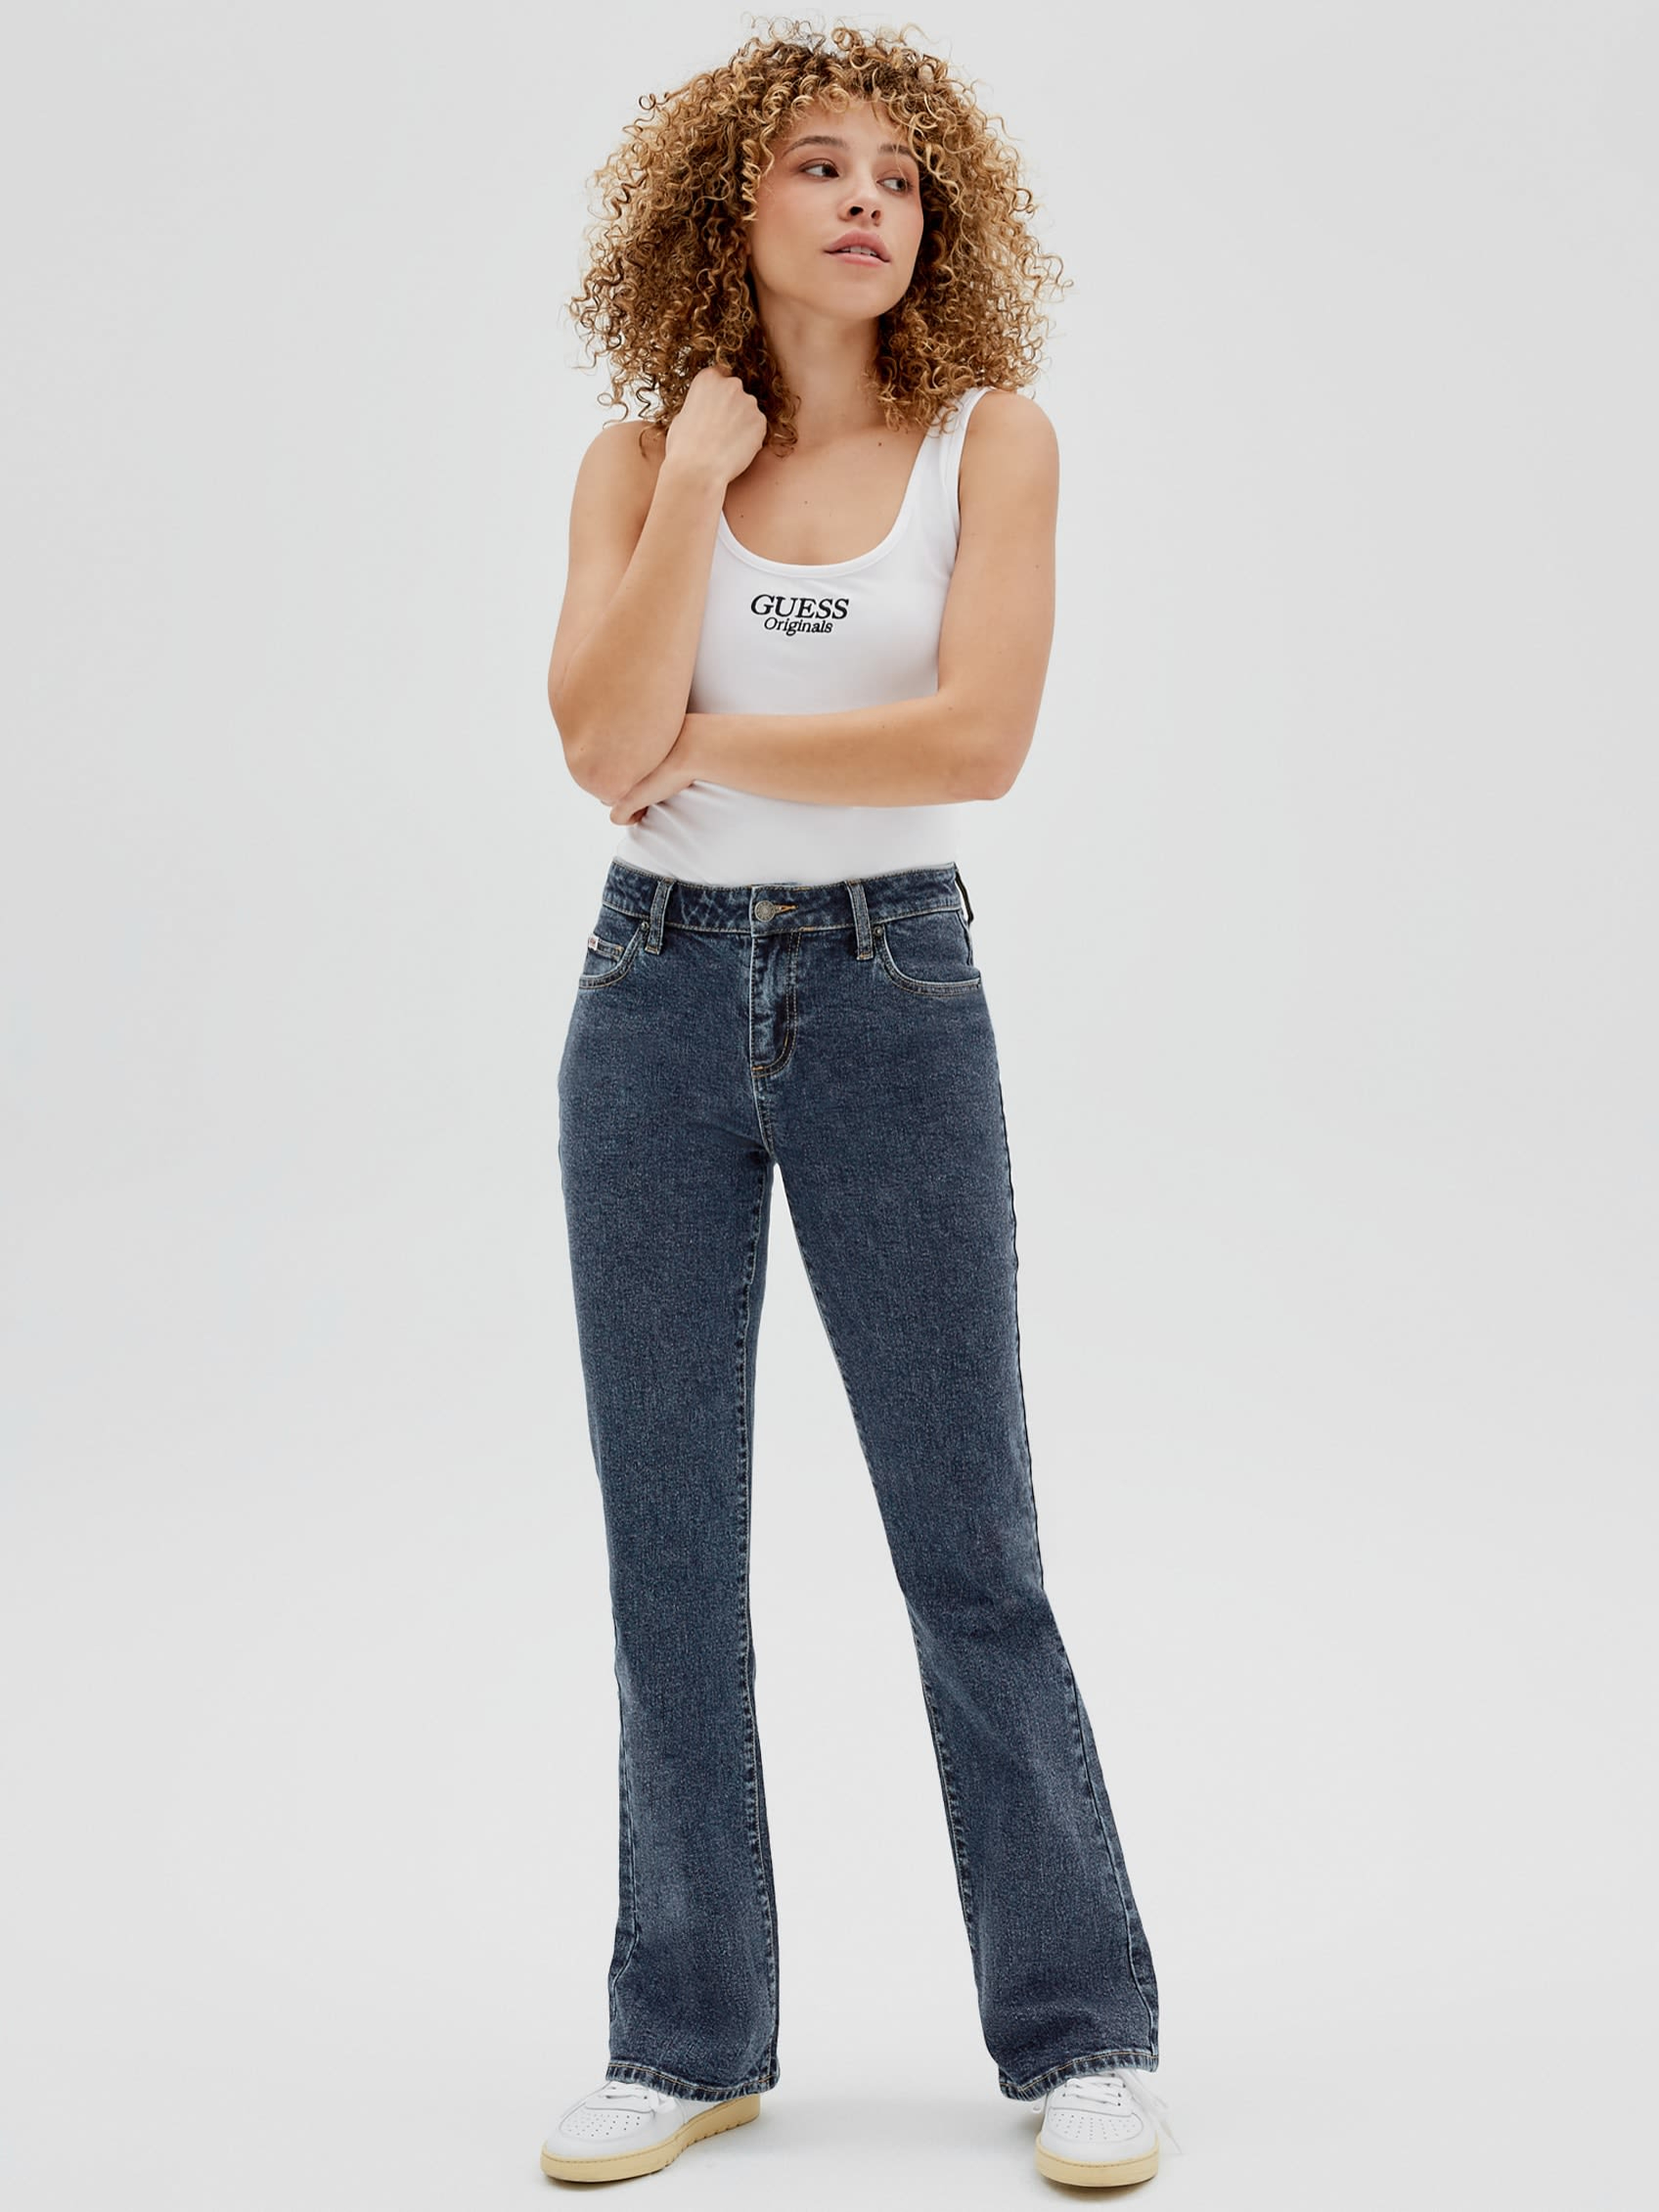 GUESS Originals EVAN RELAX MID-RISE FIT JEANS | Guess Philippines